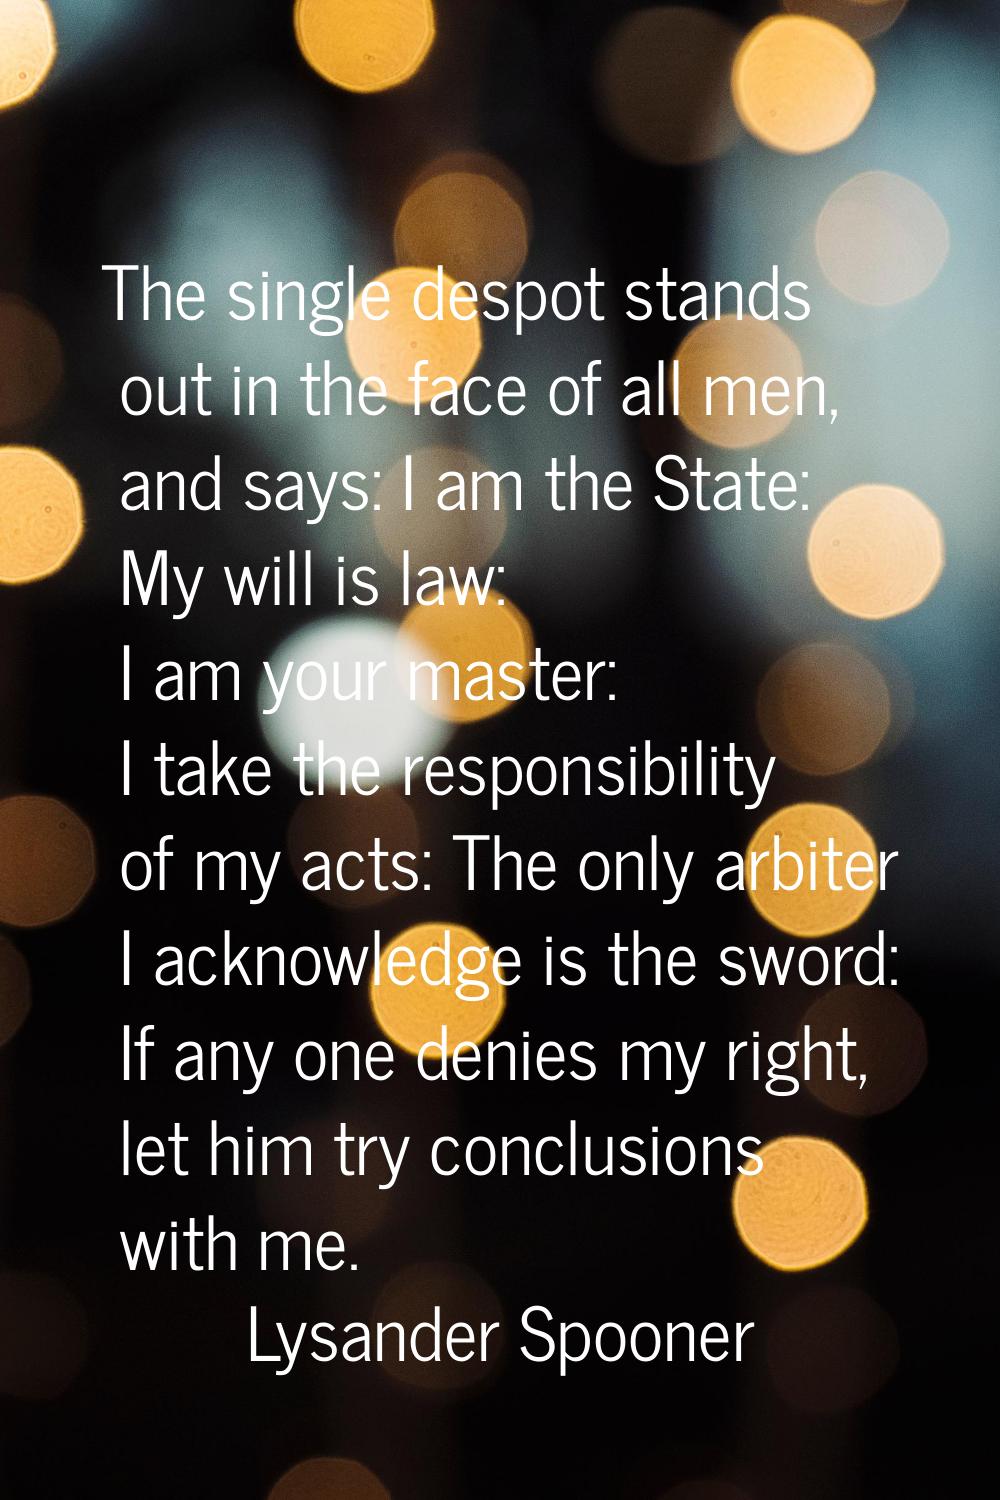 The single despot stands out in the face of all men, and says: I am the State: My will is law: I am